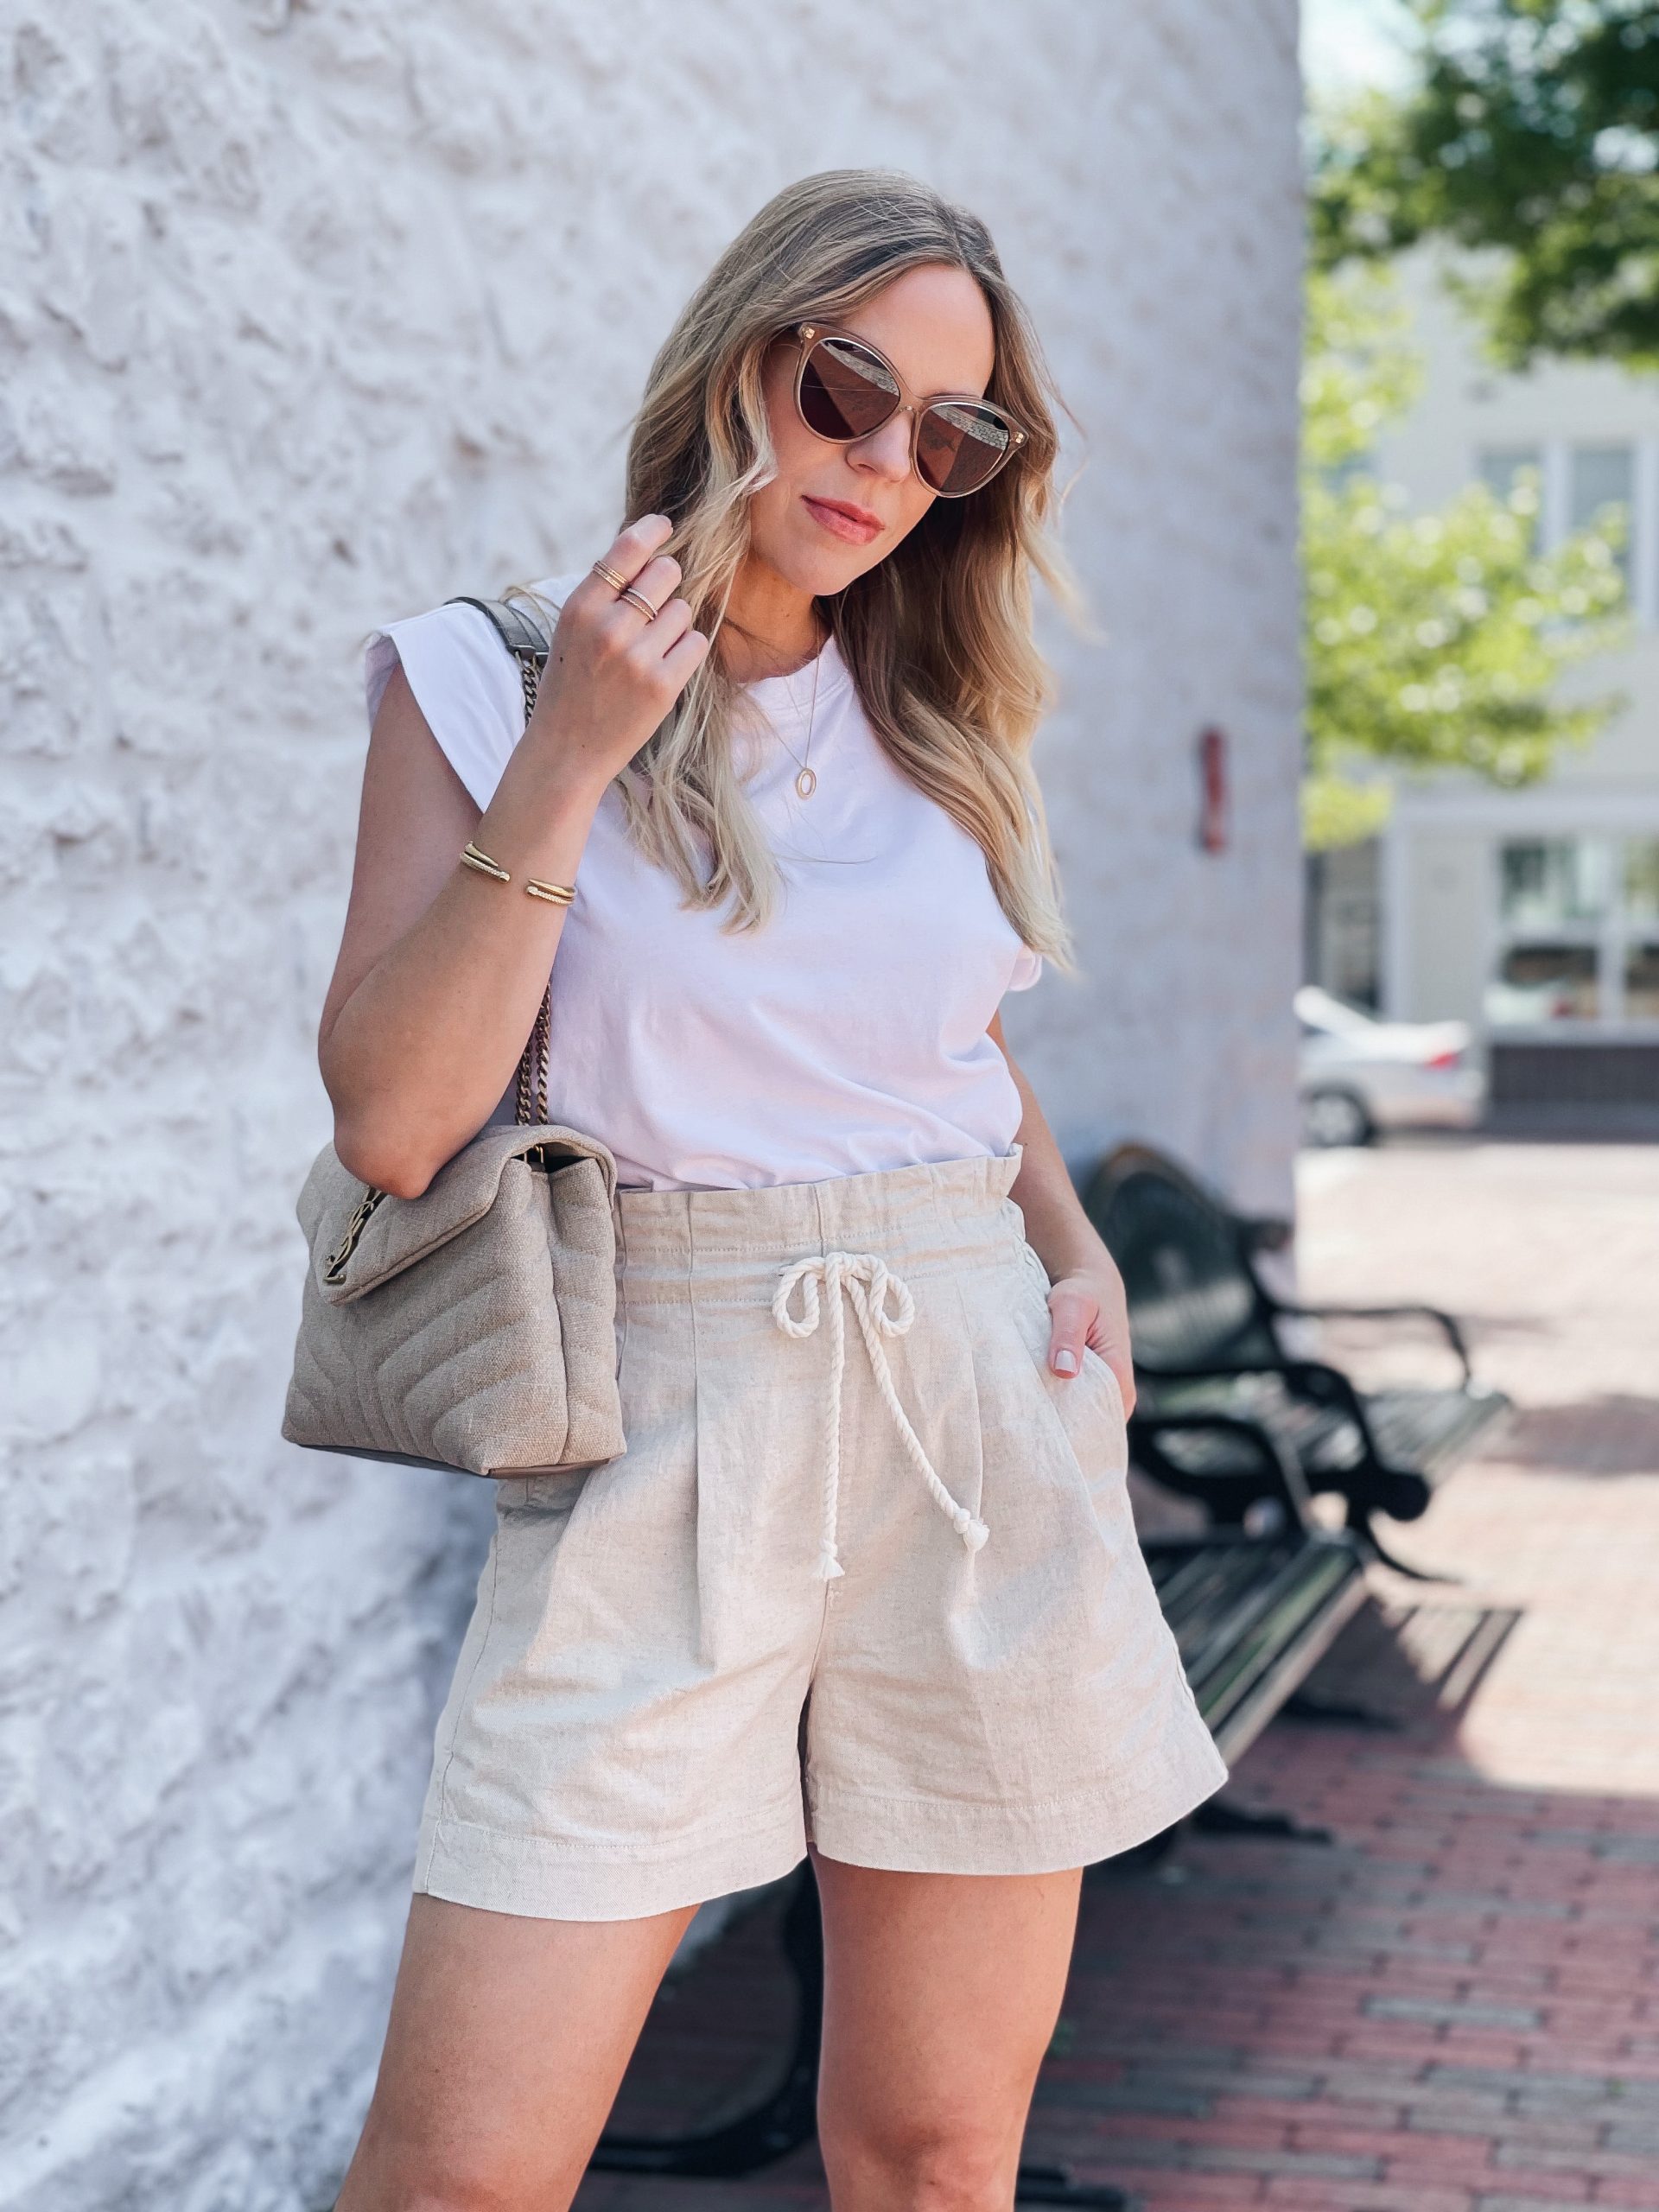 https://www.meagansmoda.com/wp-content/uploads/2021/07/Meagan-Brandon-of-Meagans-Moda-shares-postpartum-friendly-style-with-paperbag-shorts-best-shorts-to-wear-post-pregnancy-scaled.jpg